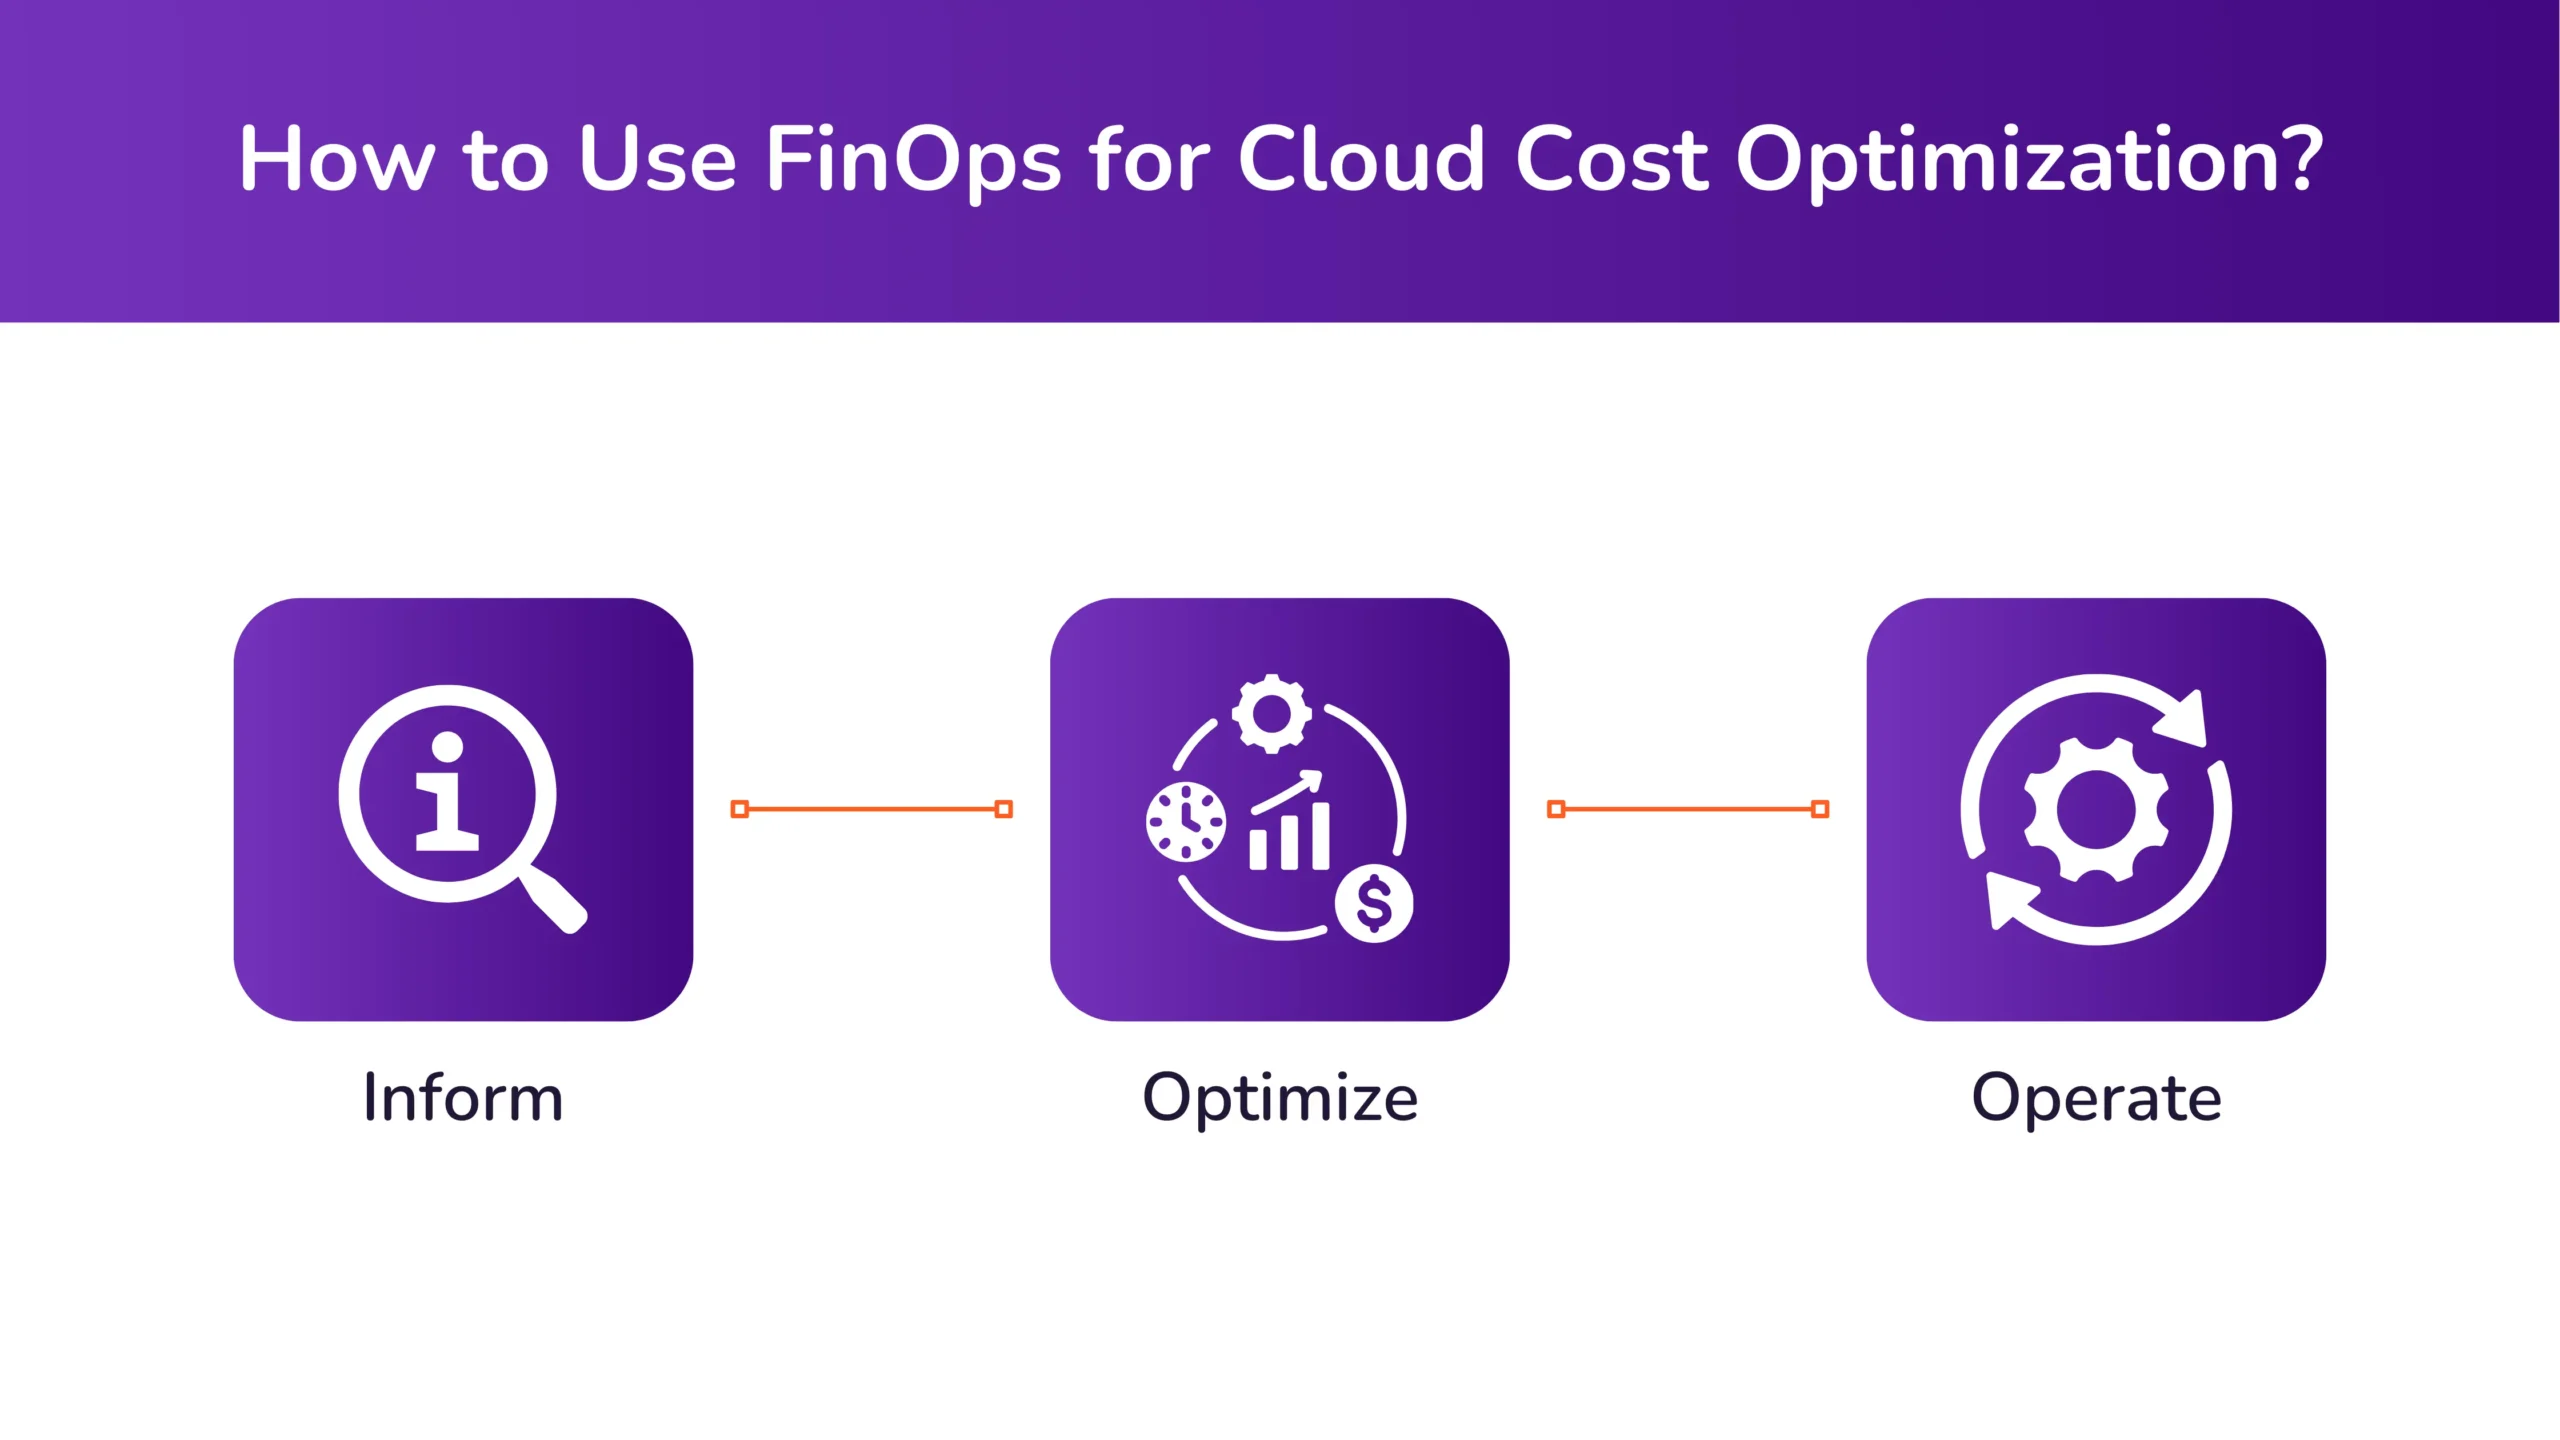 How to Use FinOps for Cloud Cost Optimization